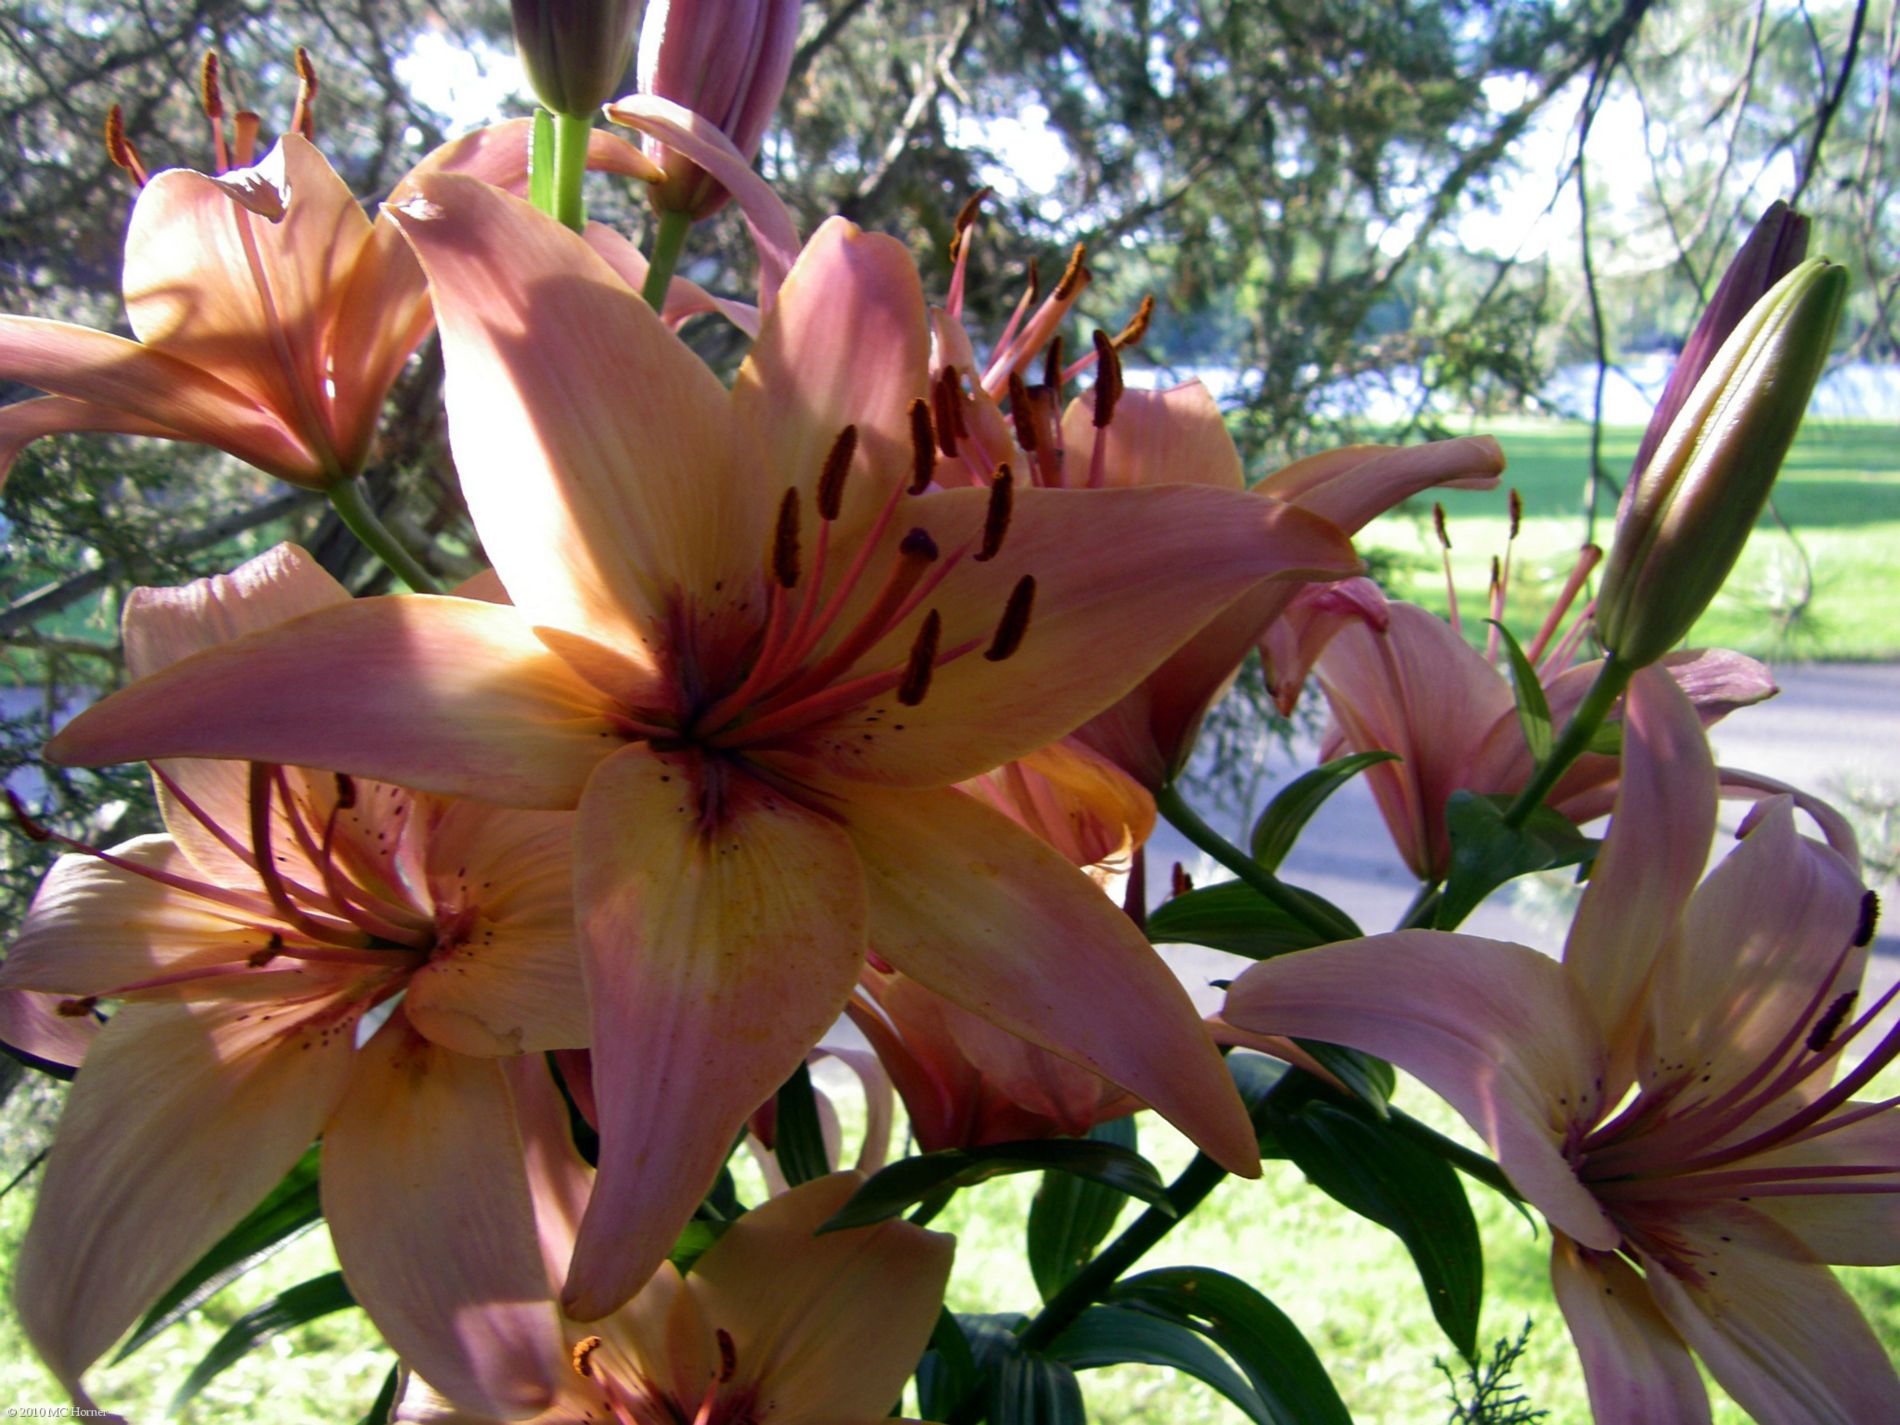 Asiatic Lillies in bloom.